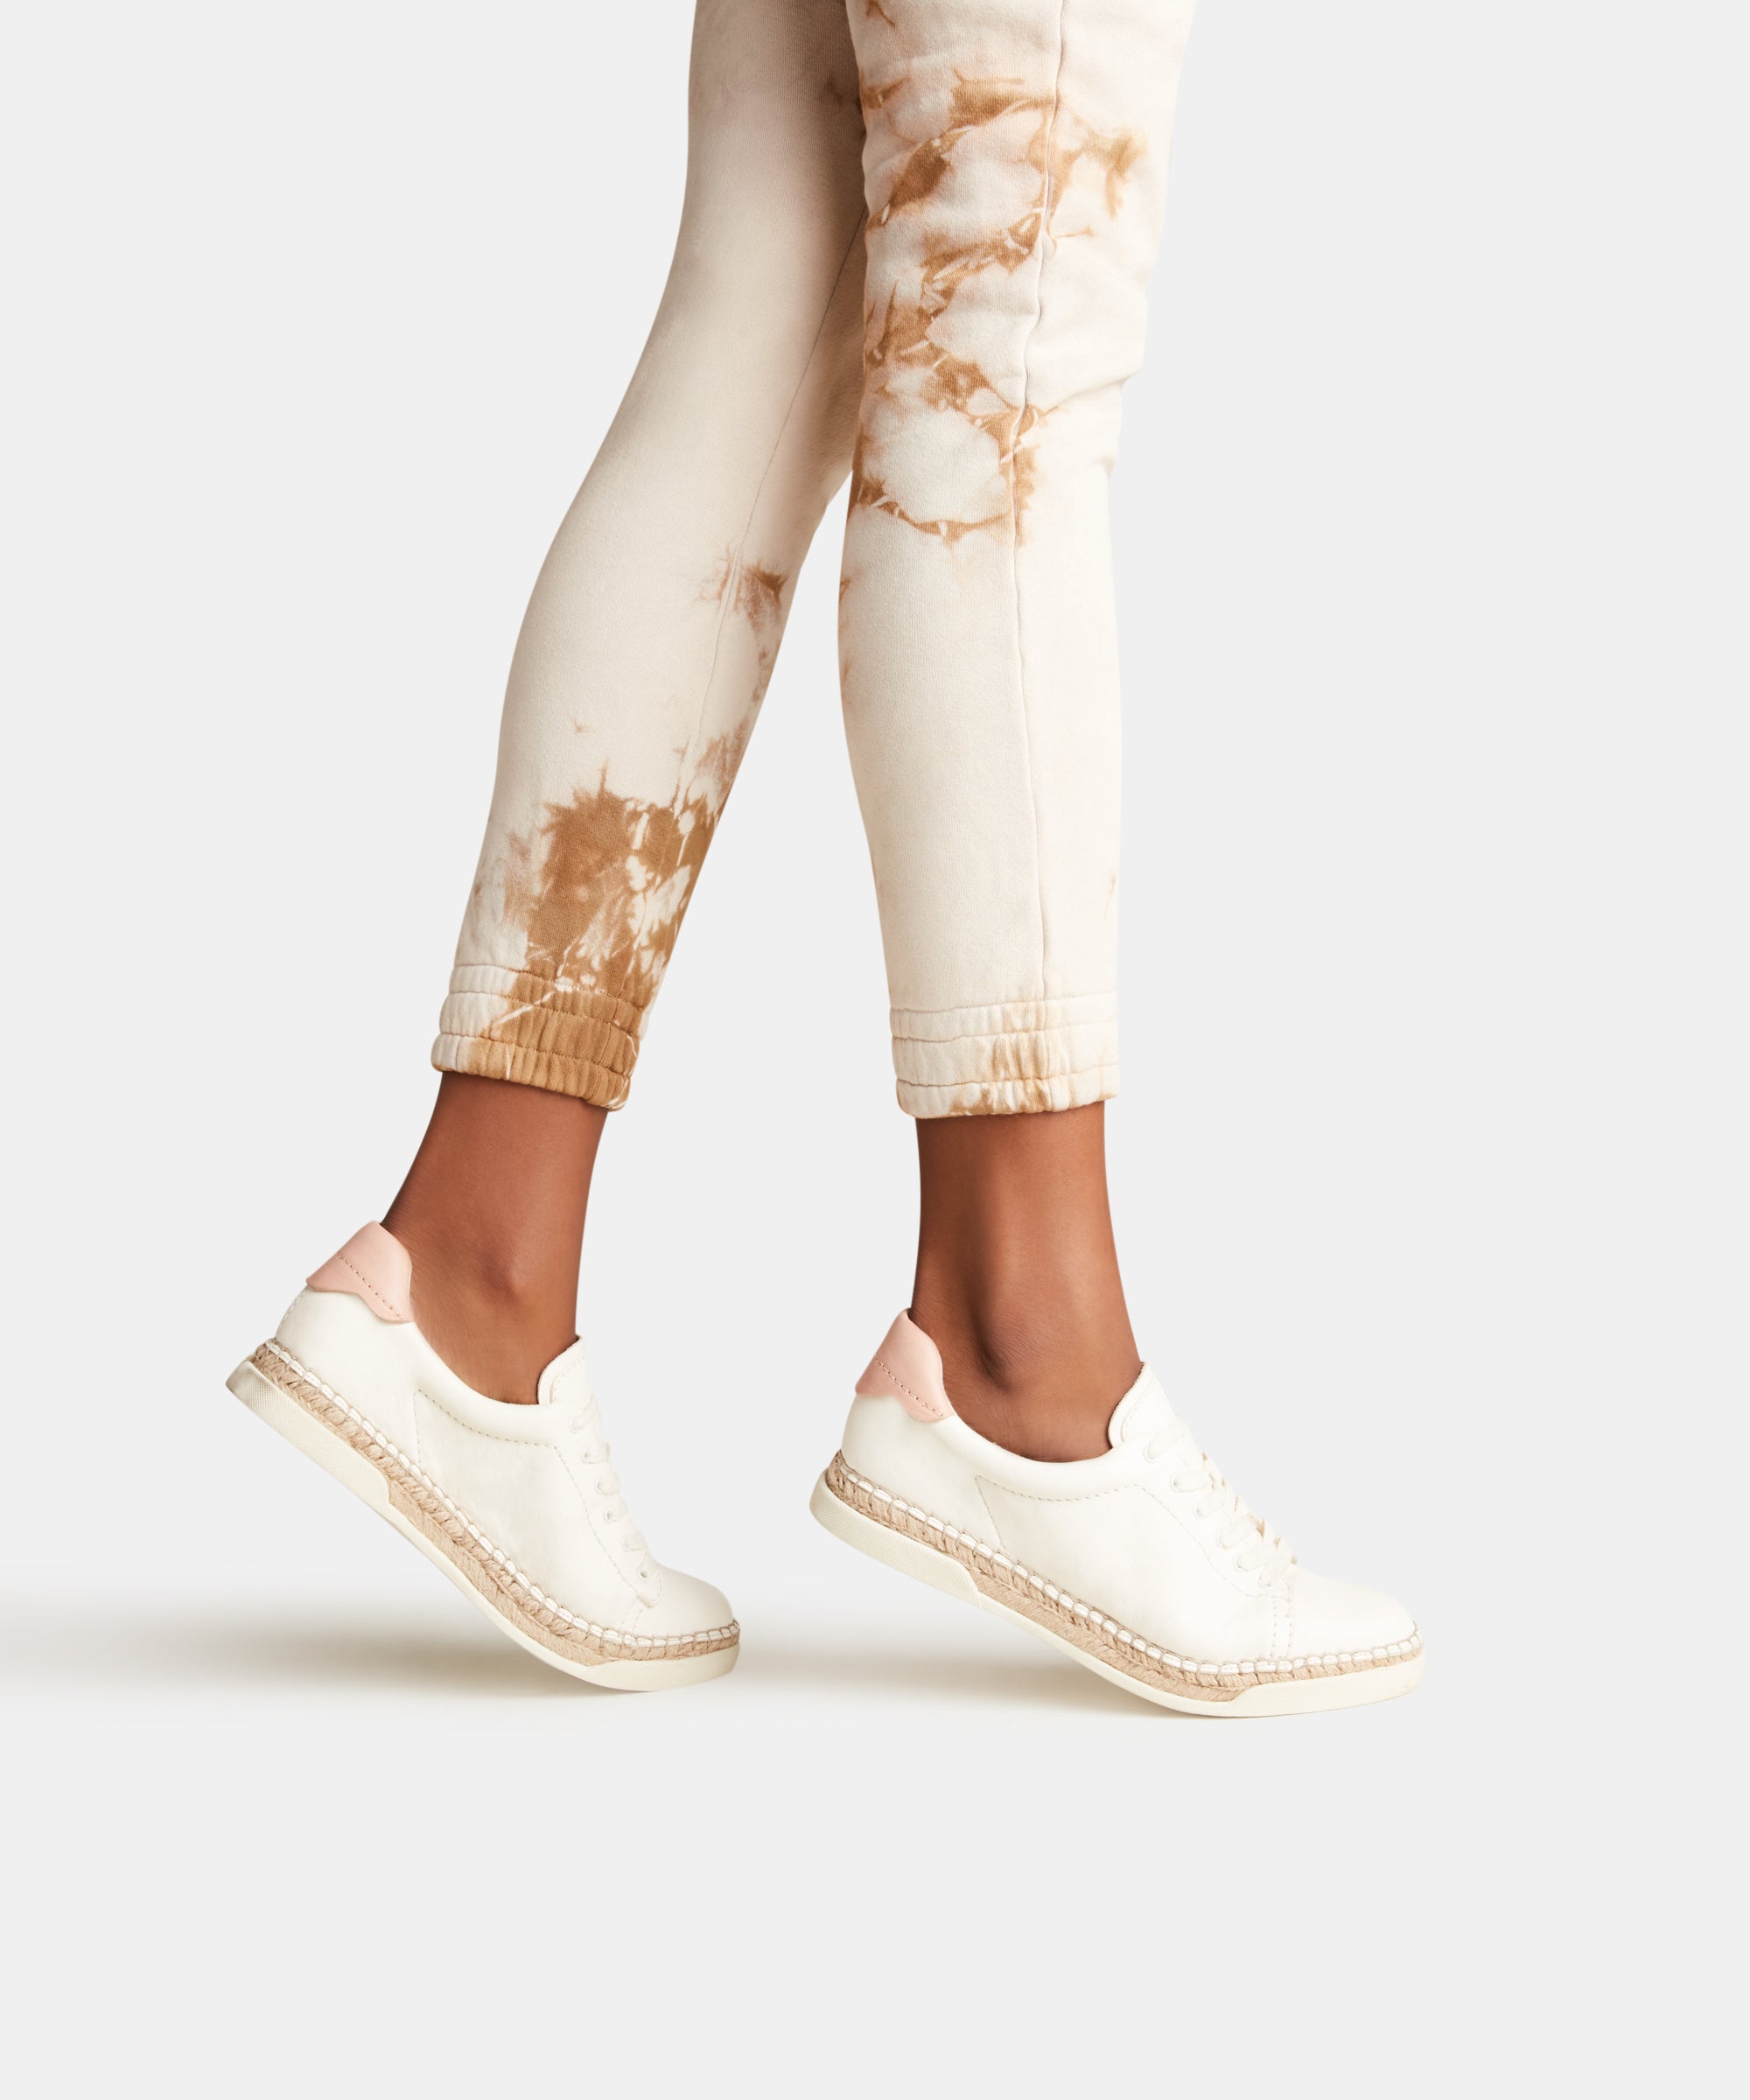 dolce vita madox espadrille sneakers